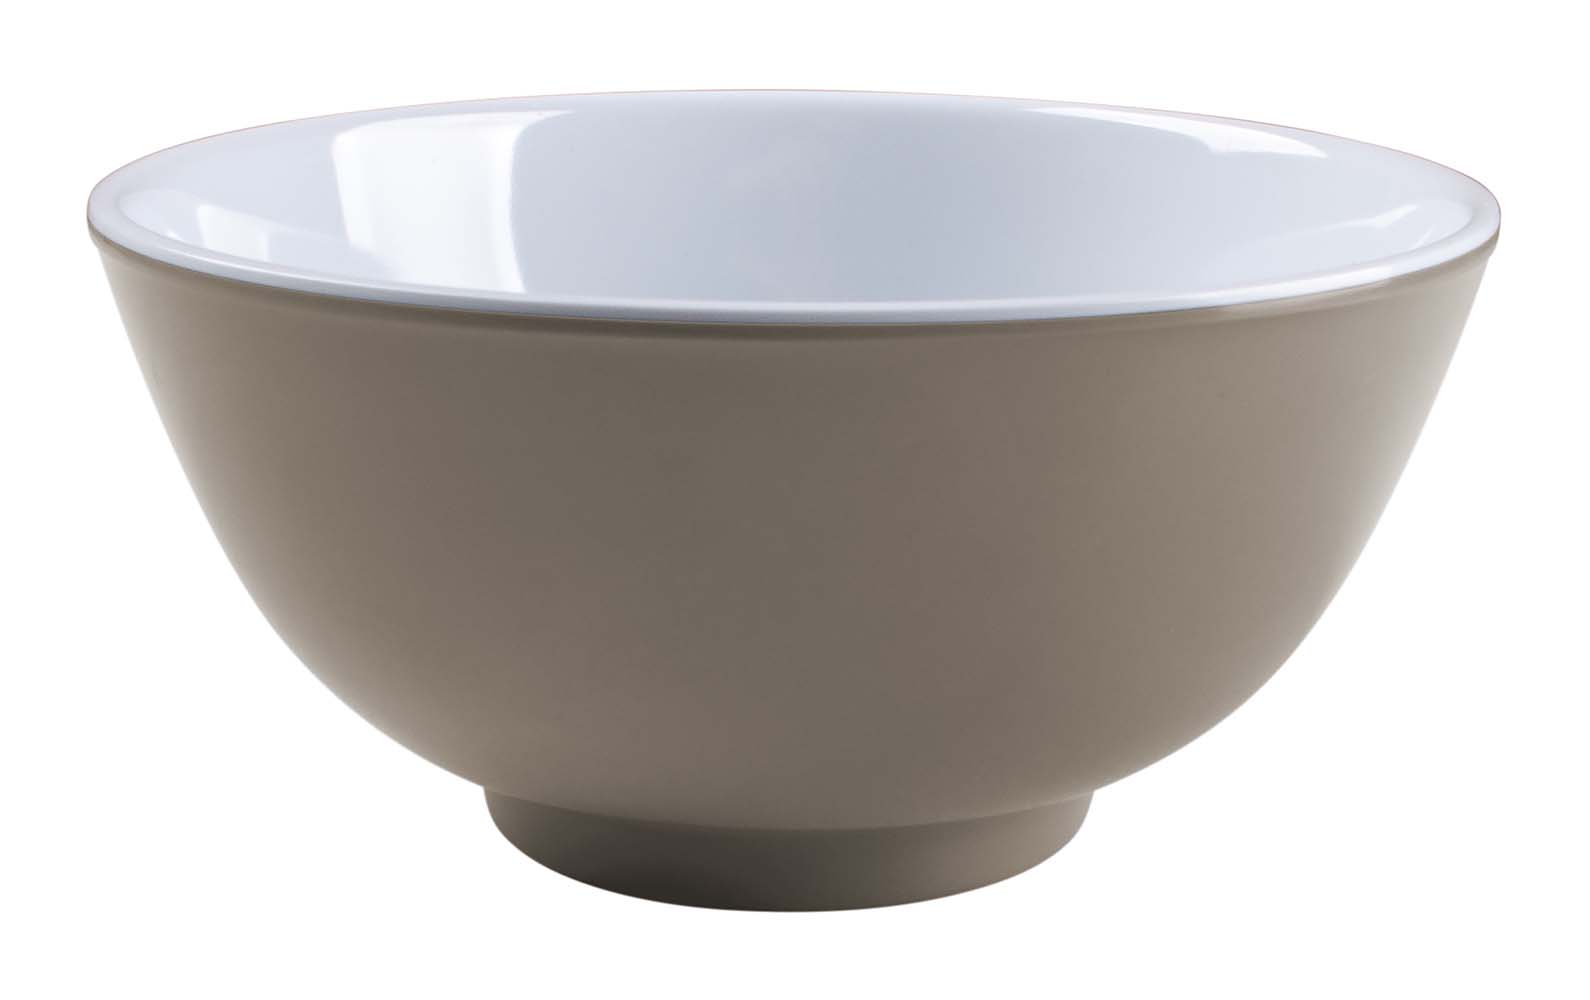 6181253 A lightweight and sturdy bowl. Virtually unbreakable, shatterproof and scratch-resistant. Made of high quality 100% melamine. Dishwasher safe and food approved.